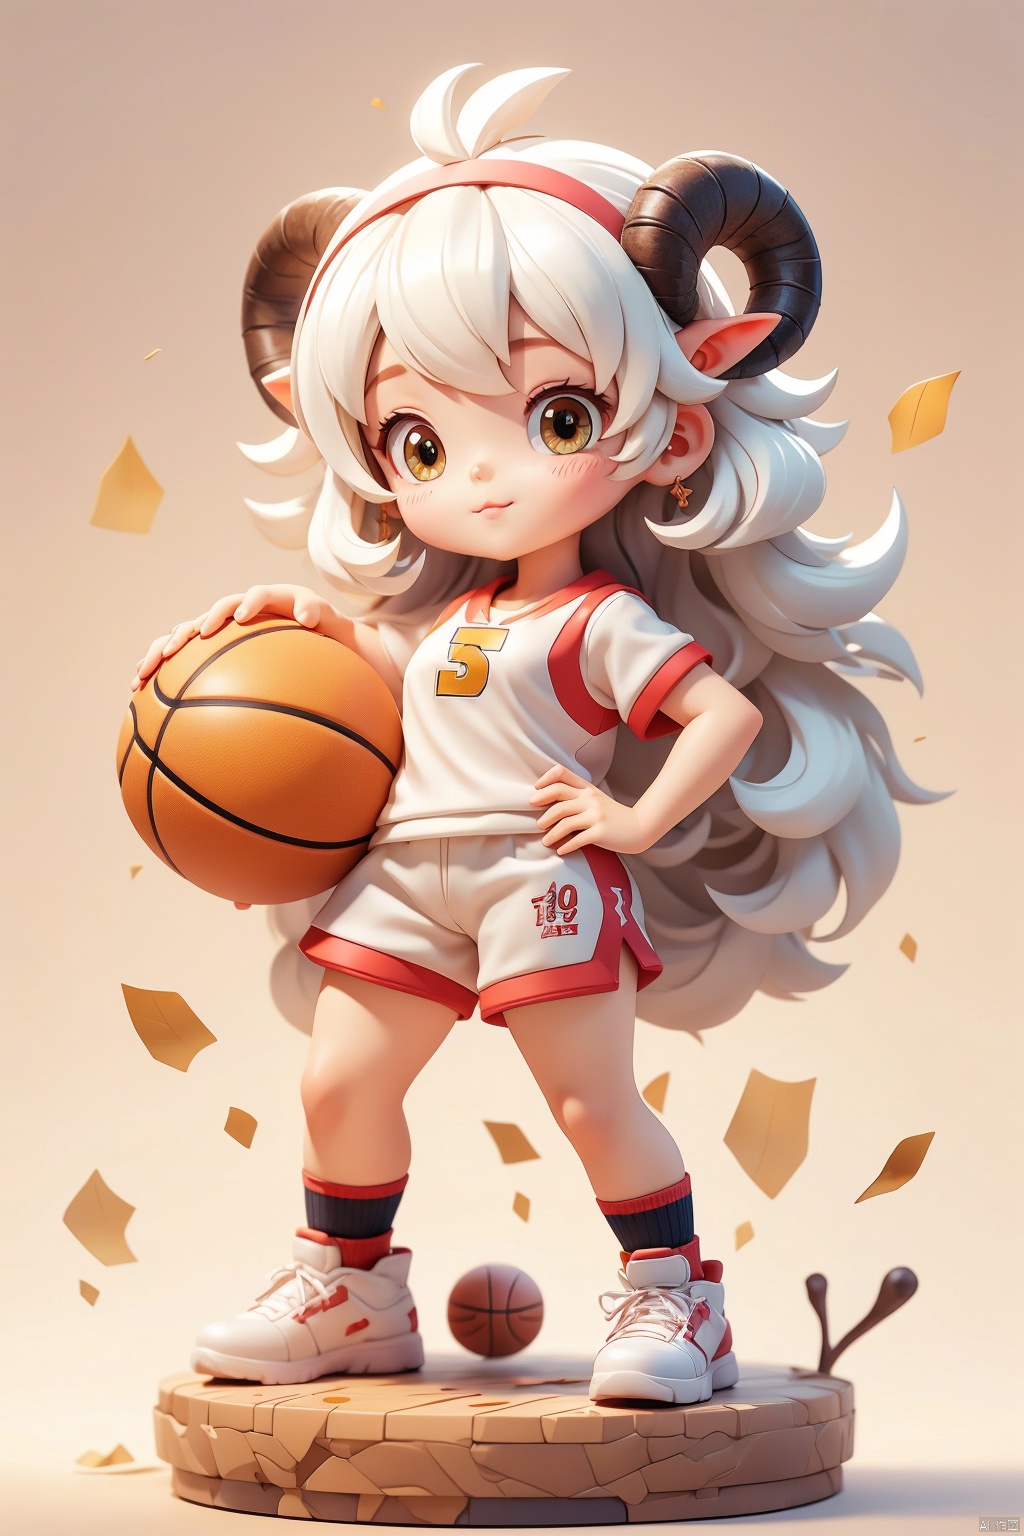 1 girl, (3 years :1.9), solo, (Q version :1.6), IP, determined expression, sheep horns, animal features, blush, basketball uniform, simple white background, white hair, (sheep hair :0.6), hands on hips